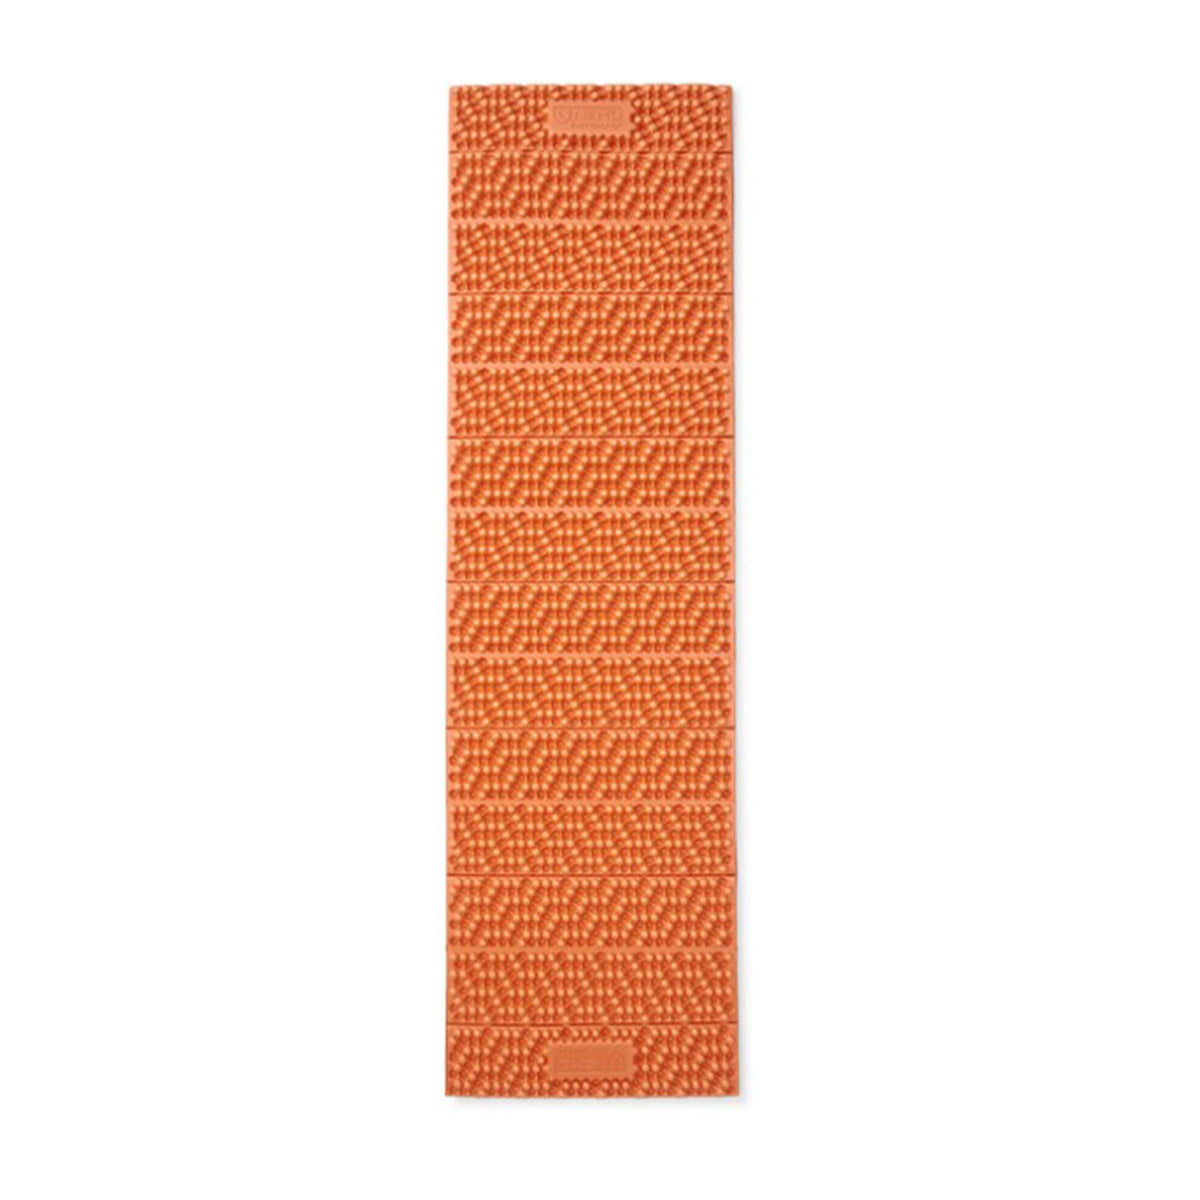 Hero image featuring the front of the Nemo Switchback Ultralight insulated sleeping pad in bright orange.